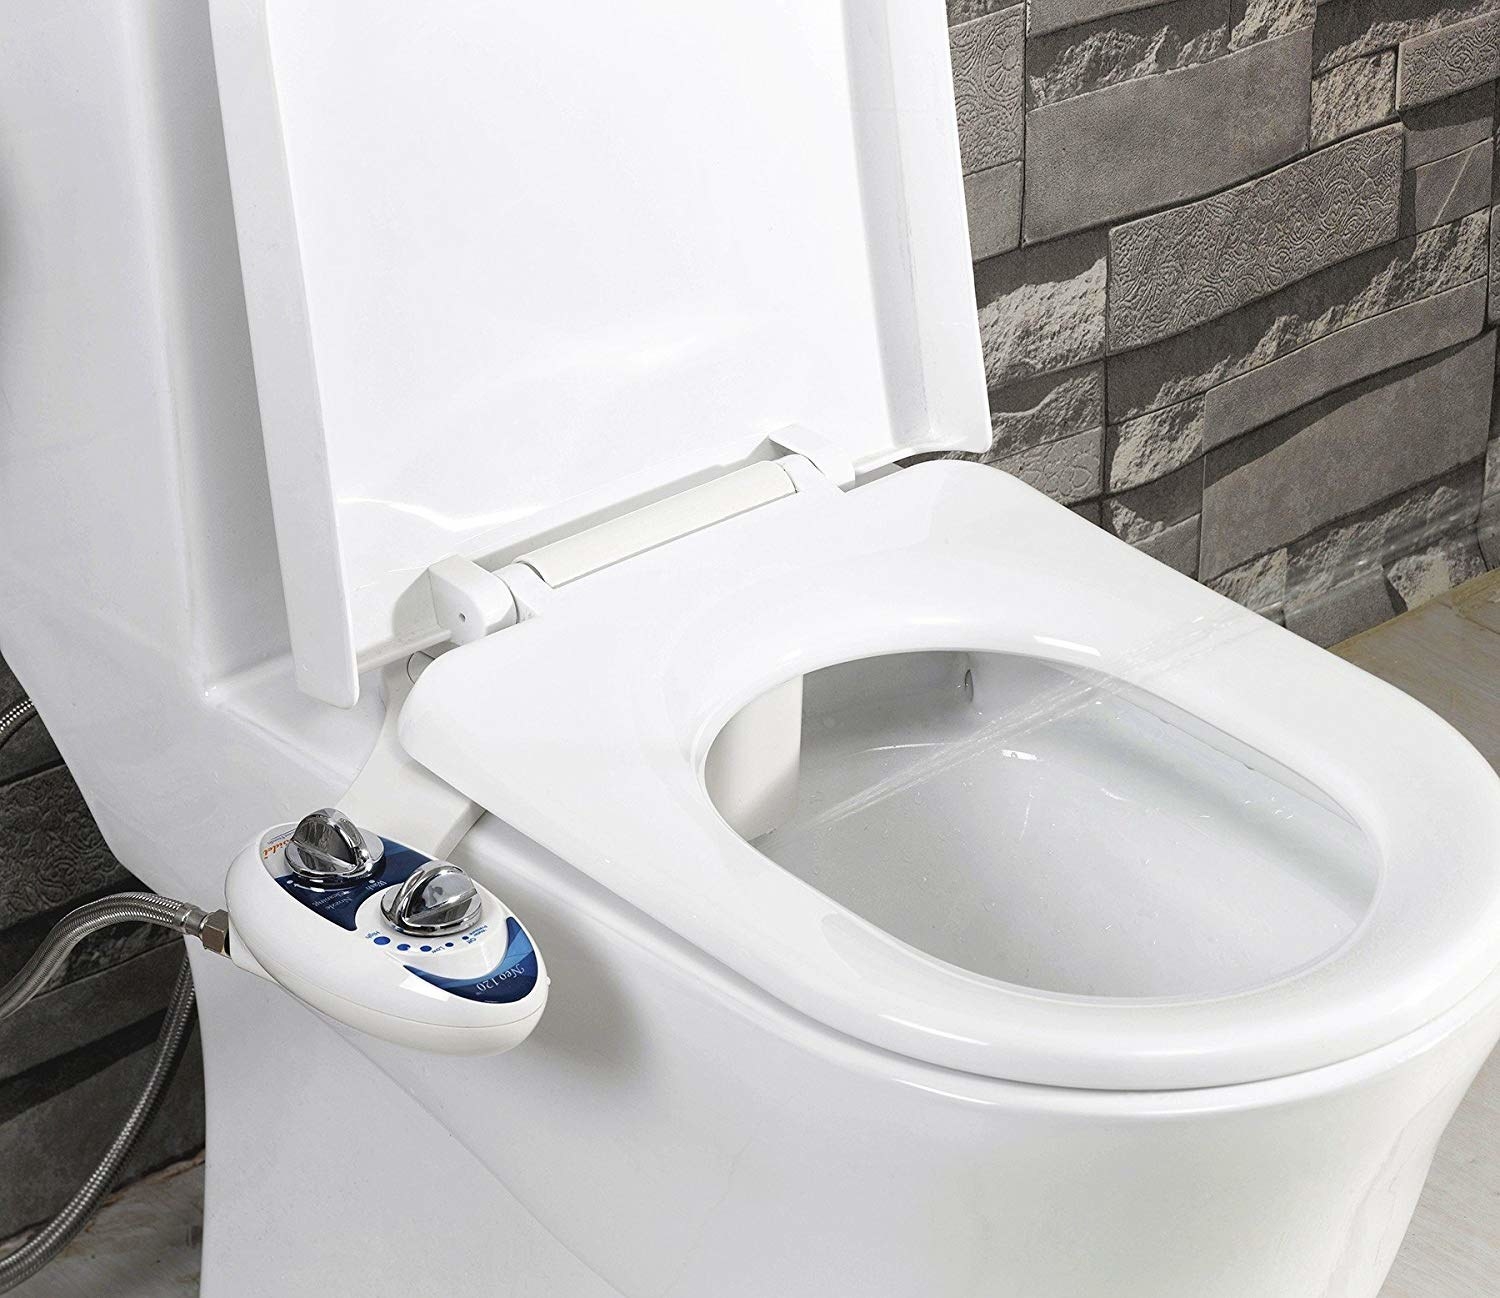 bidet attachment installed on toilet with two control knobs